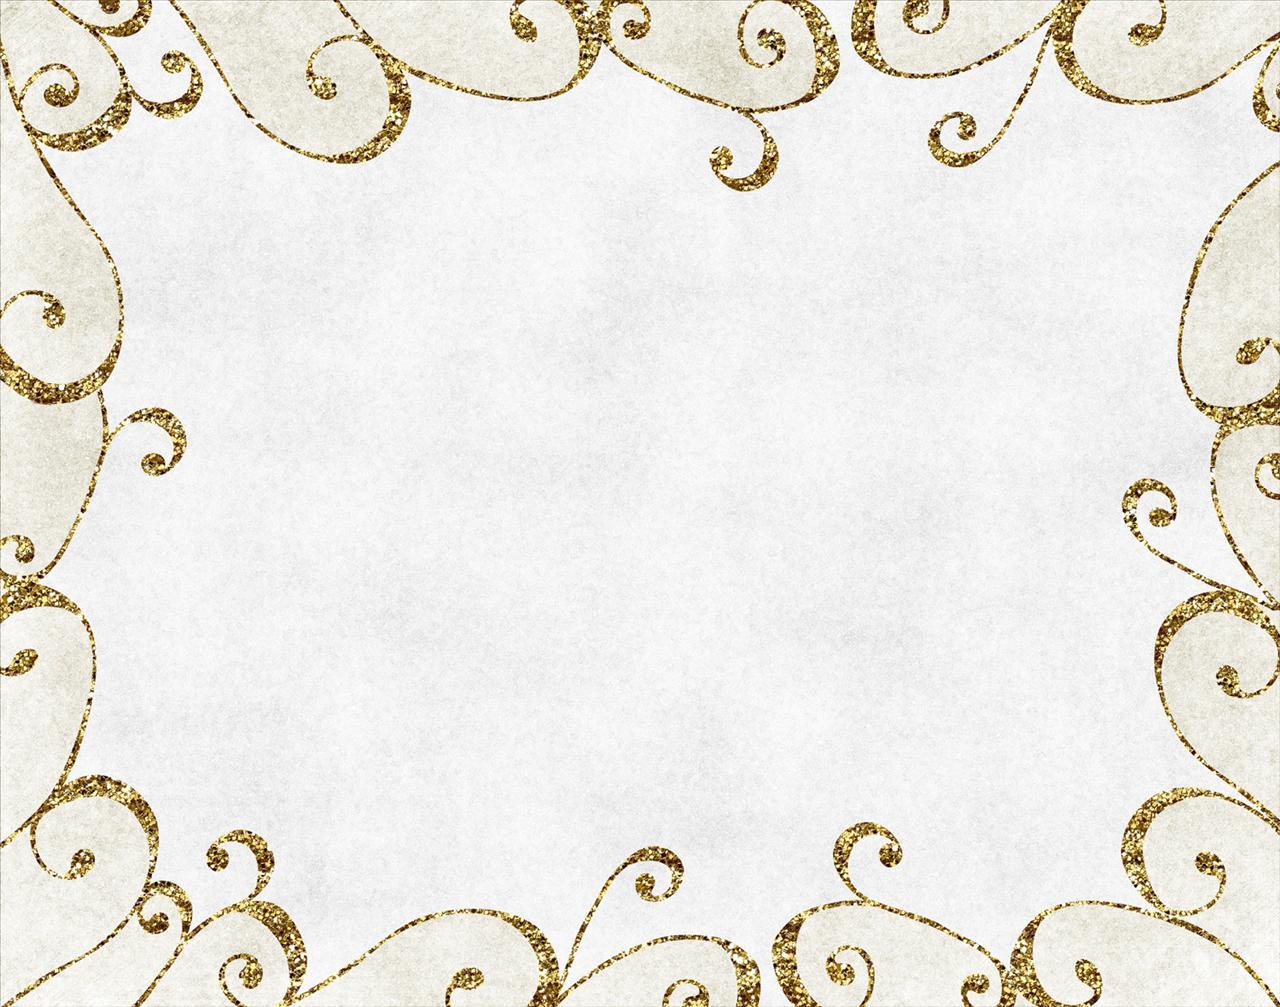 Religious Elegant Page Border Designs Image Gold Page